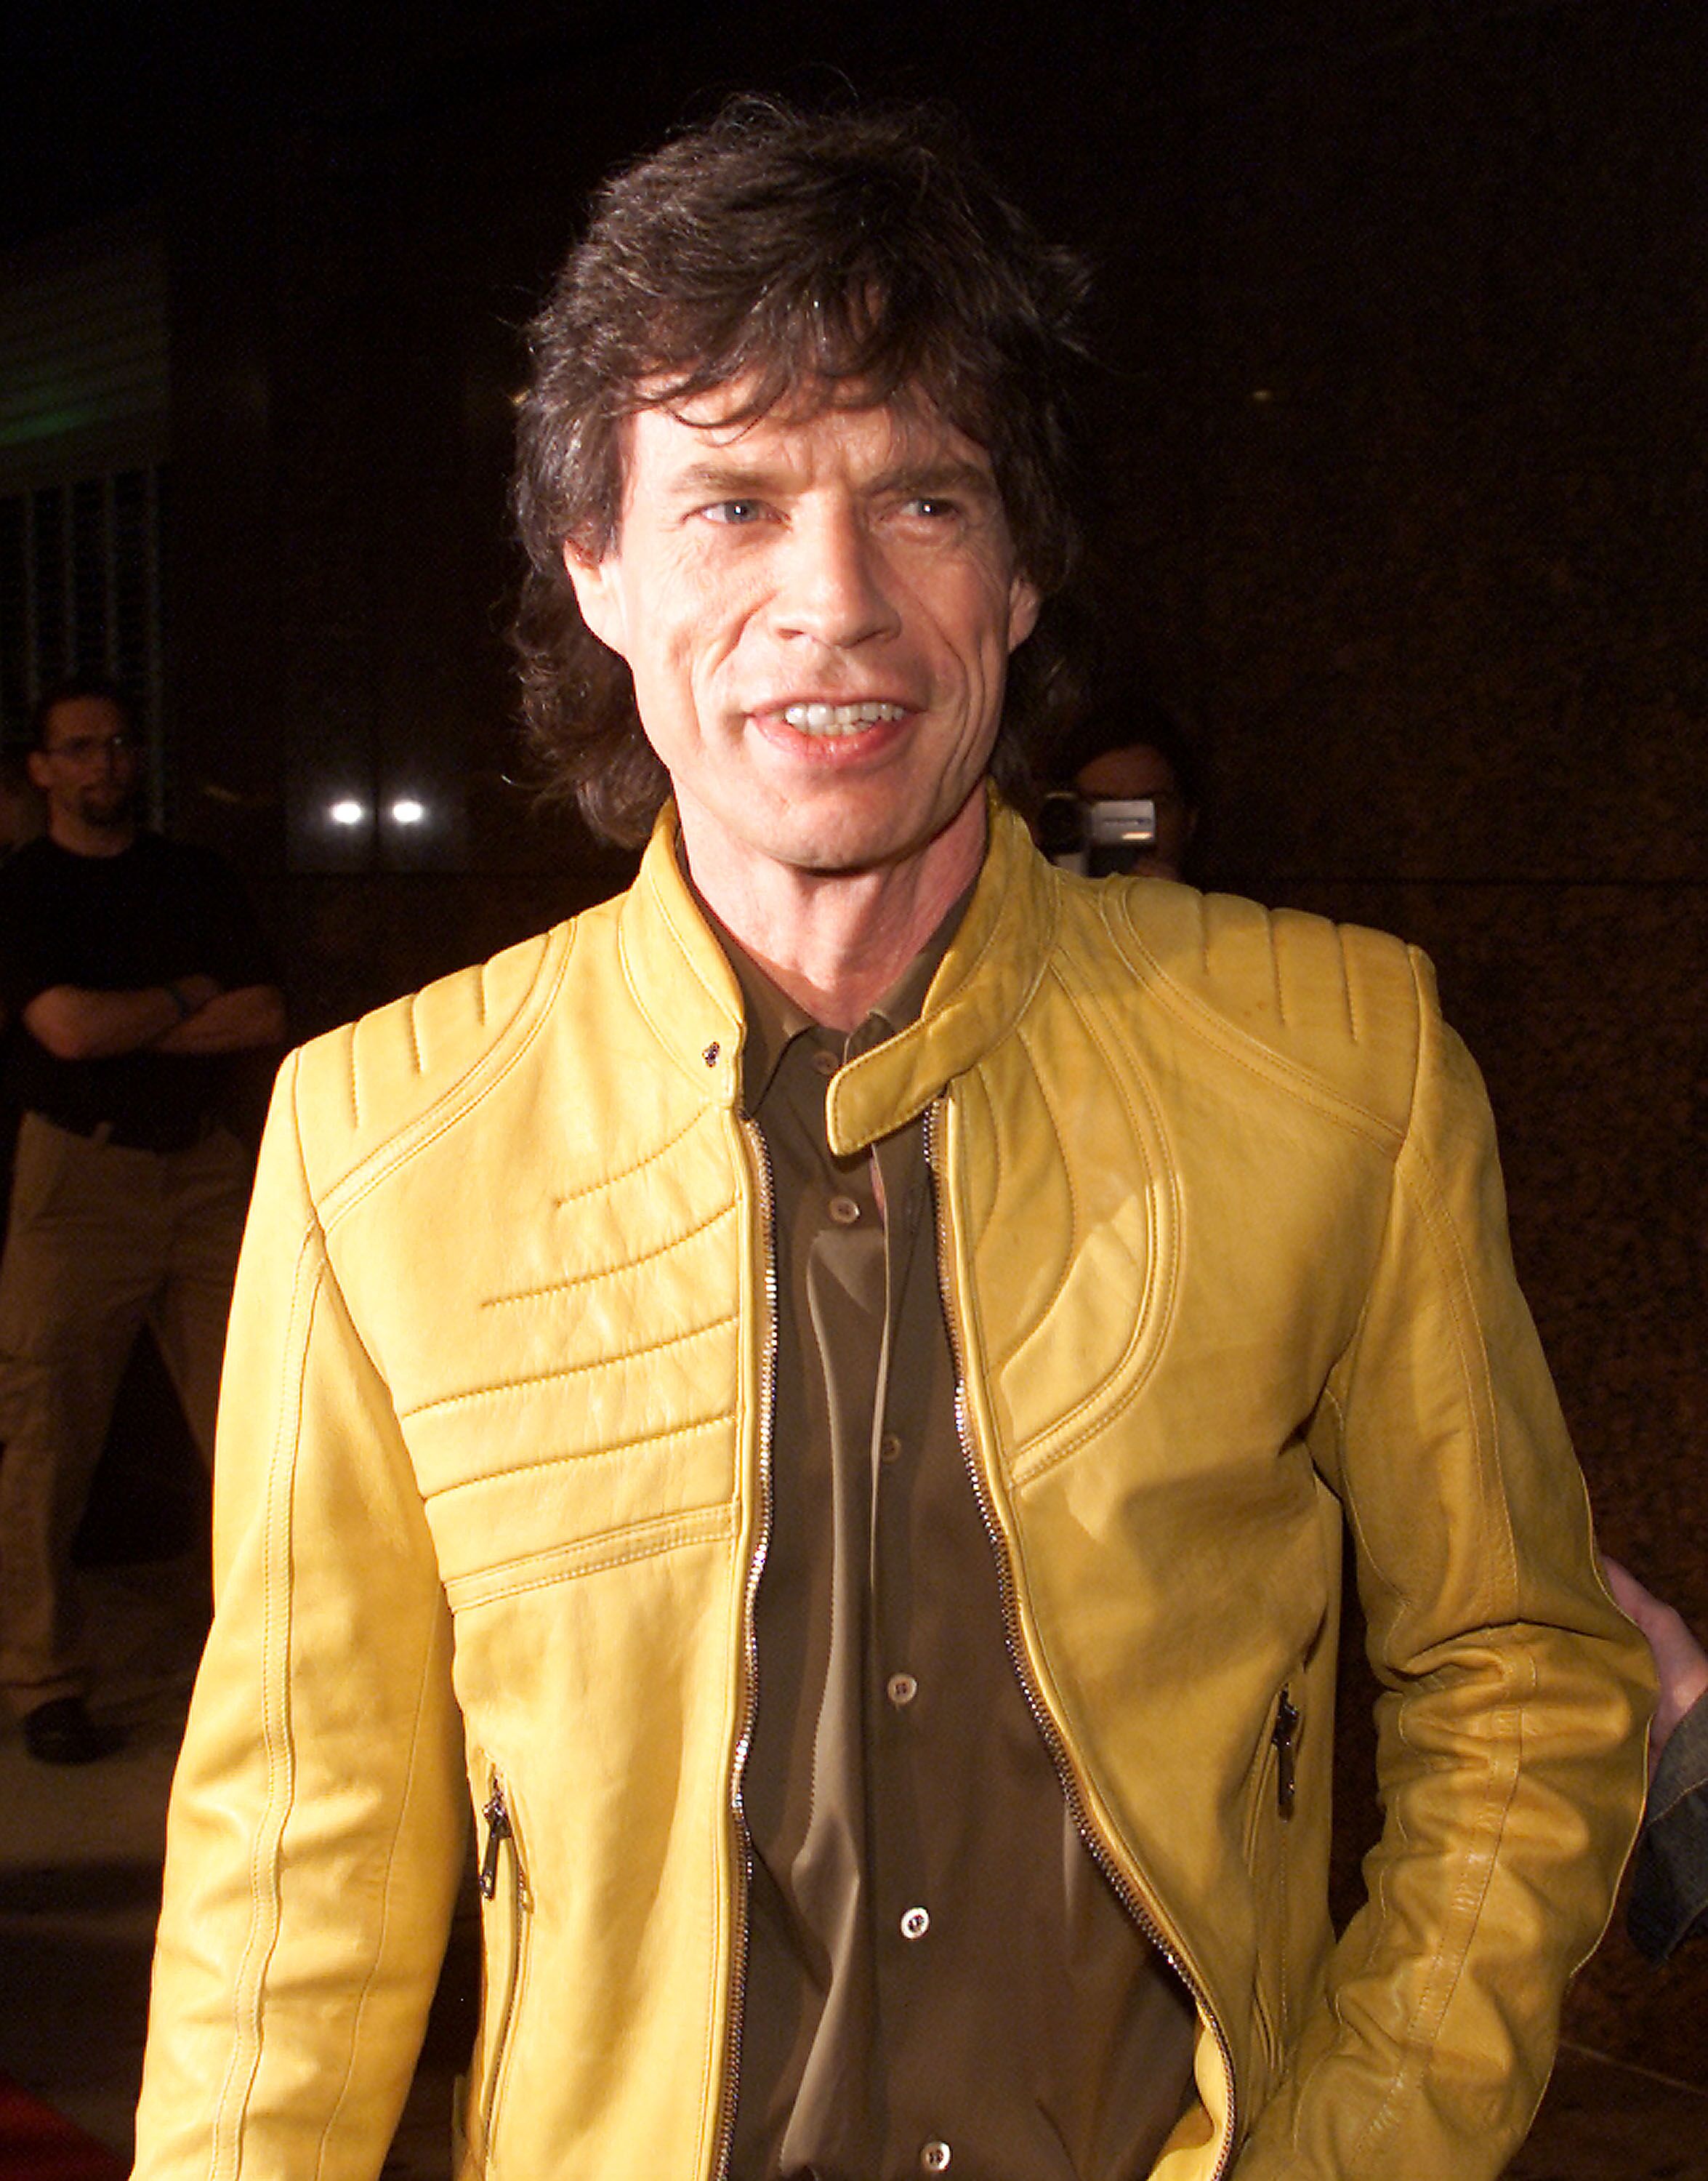 Mick Jagger at the El Rey Theater in Los Angeles to celebrate the release of his new solo album "Goddess in the Doorway" on November 15, 2001 | Photo: Kevin Winter/Getty Images